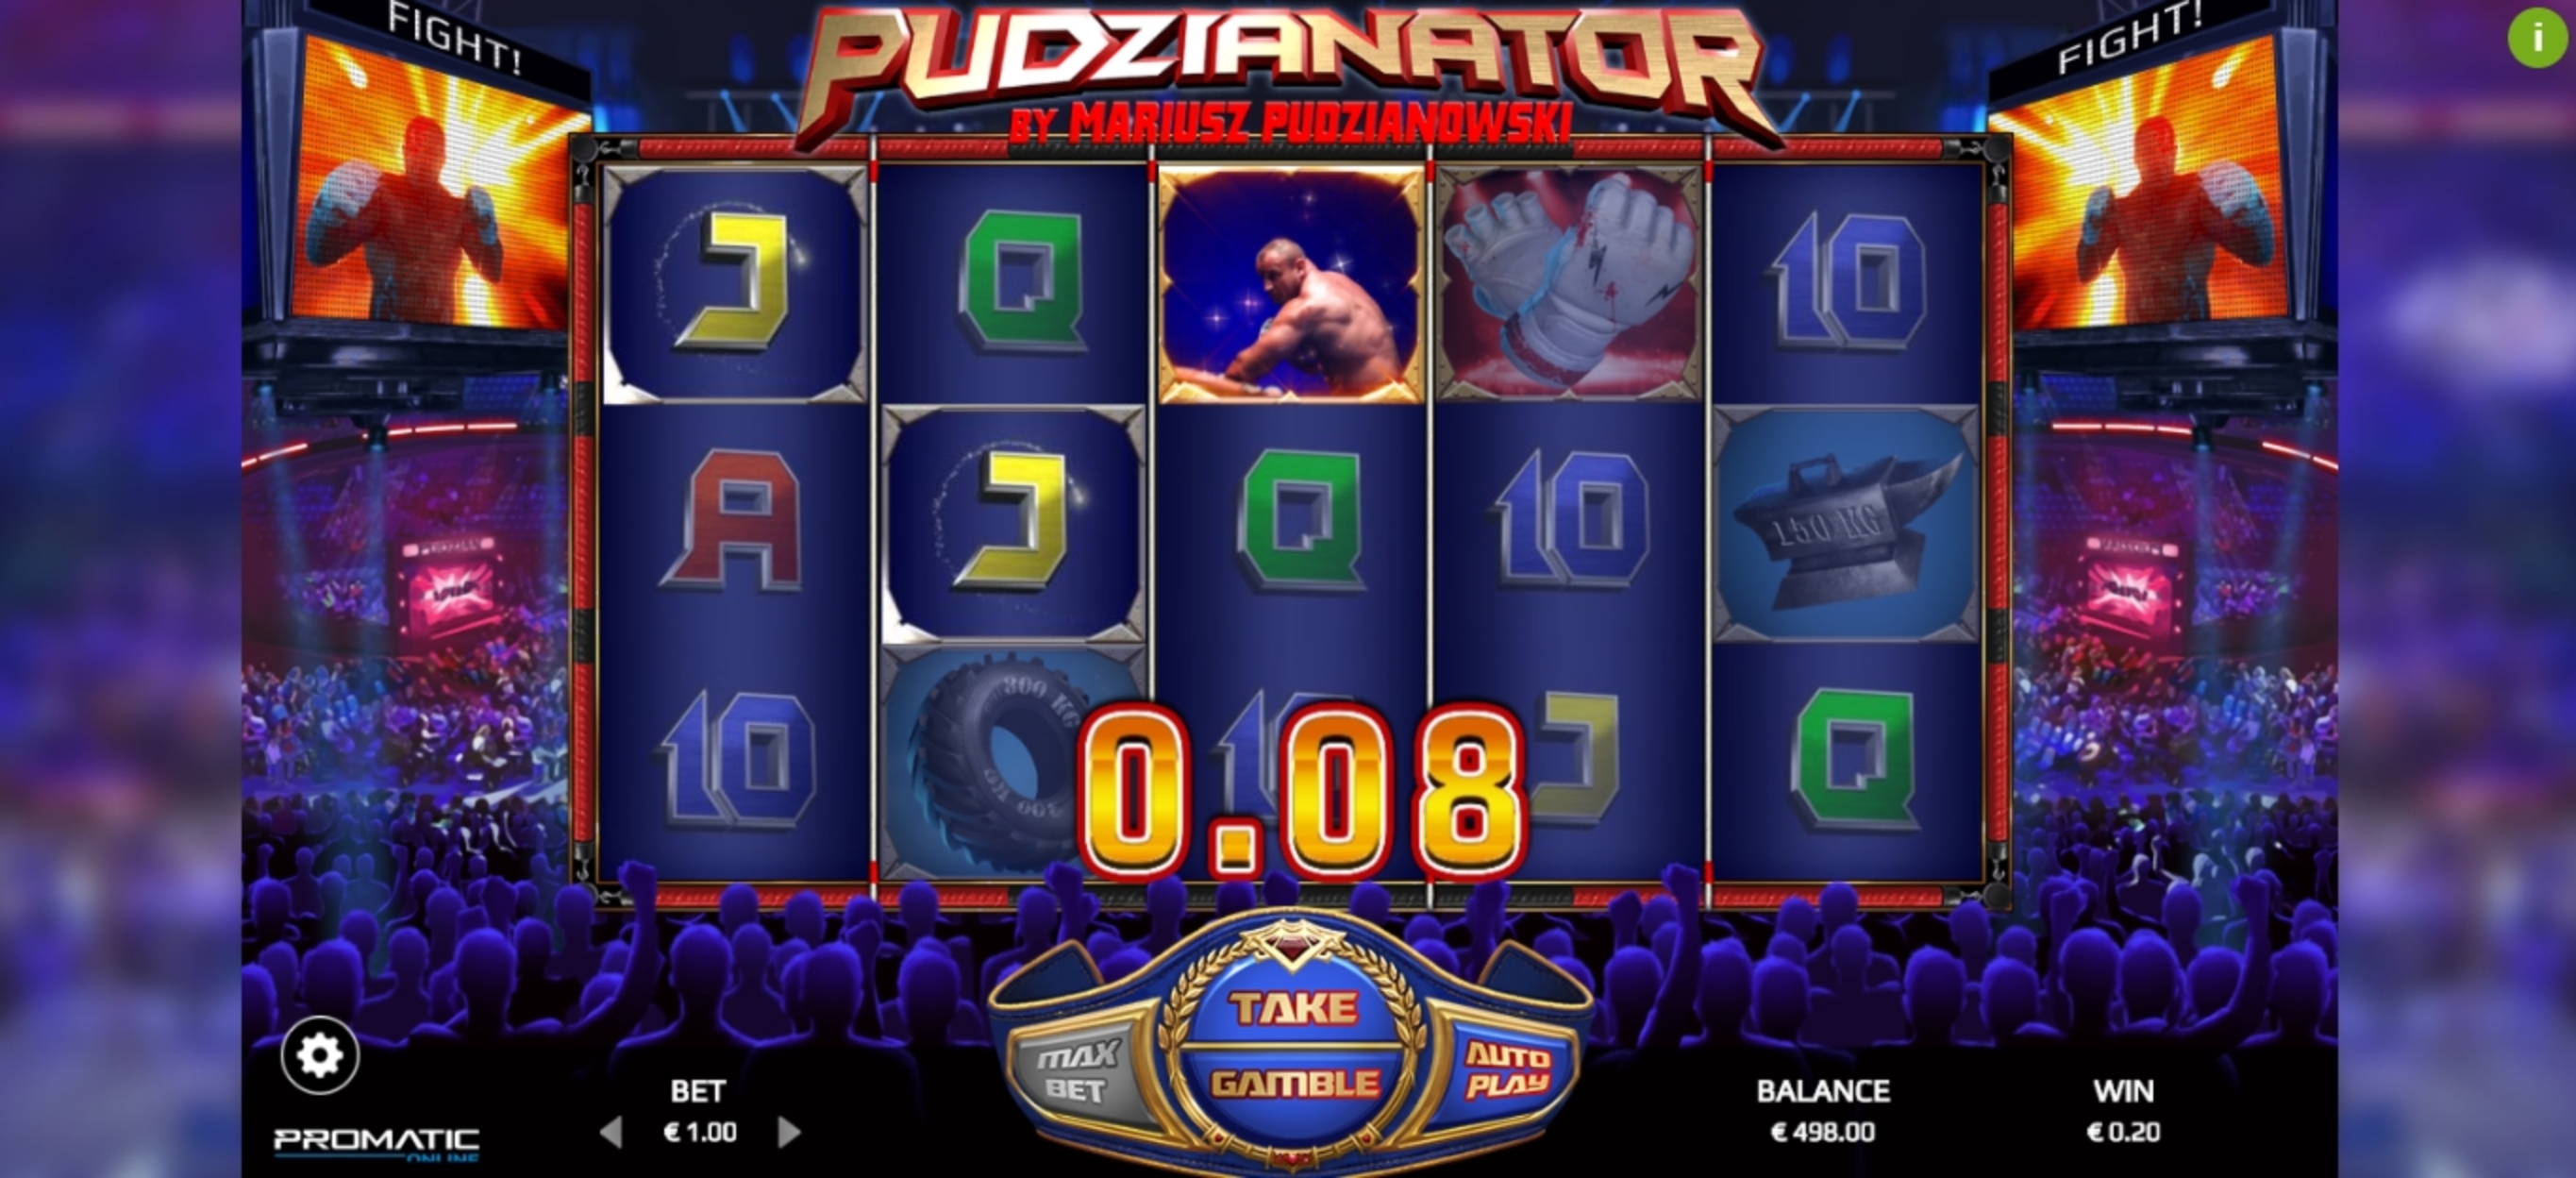 Win Money in Pudzianator Free Slot Game by Promatic Games